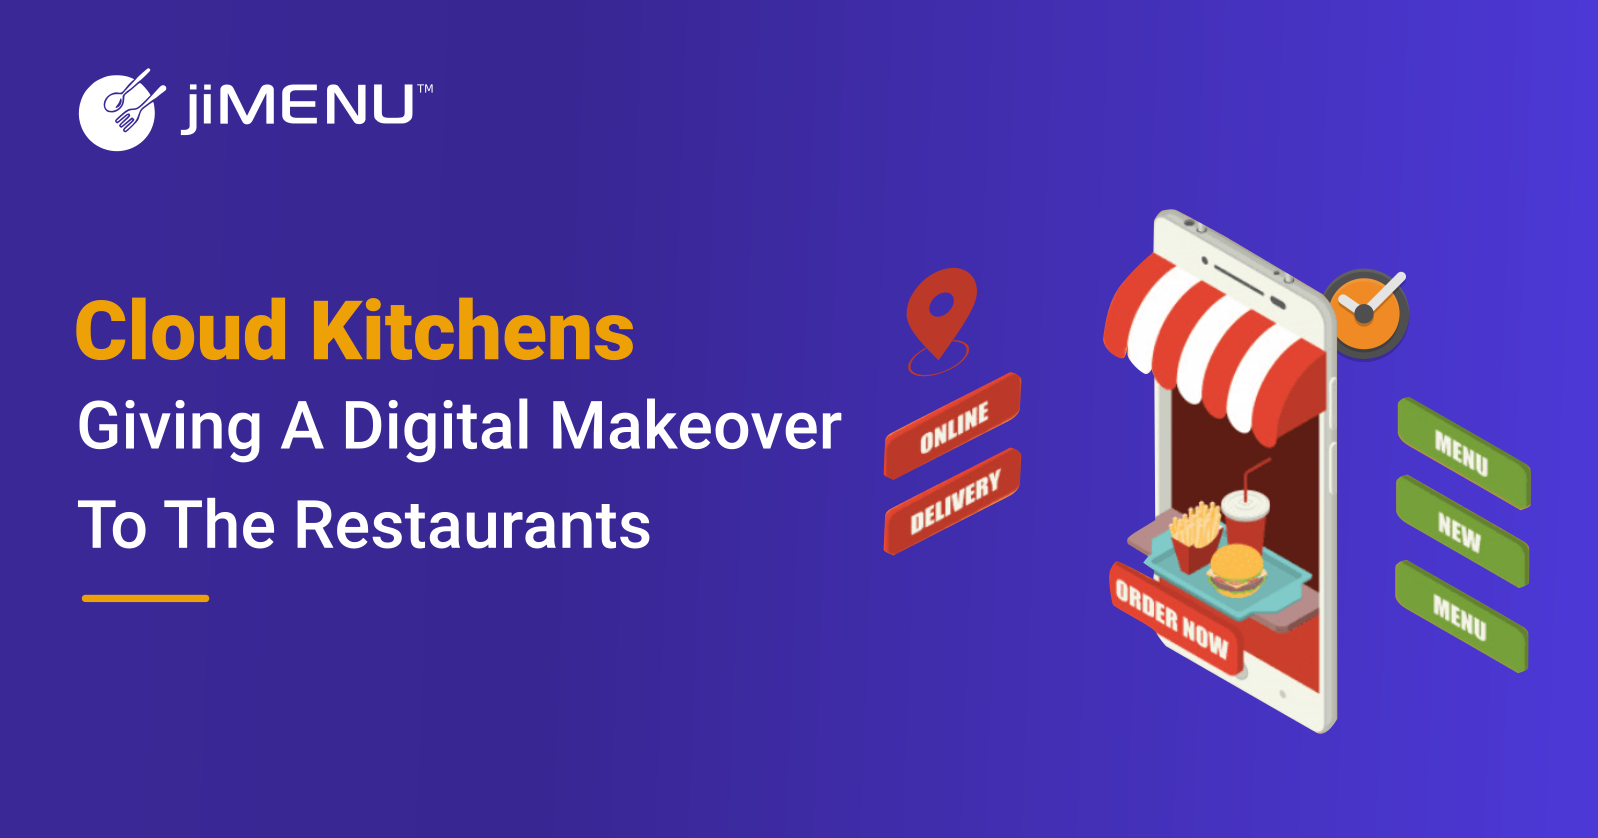 How are the Cloud Kitchens giving a Digital Makeover to the Restaurants?